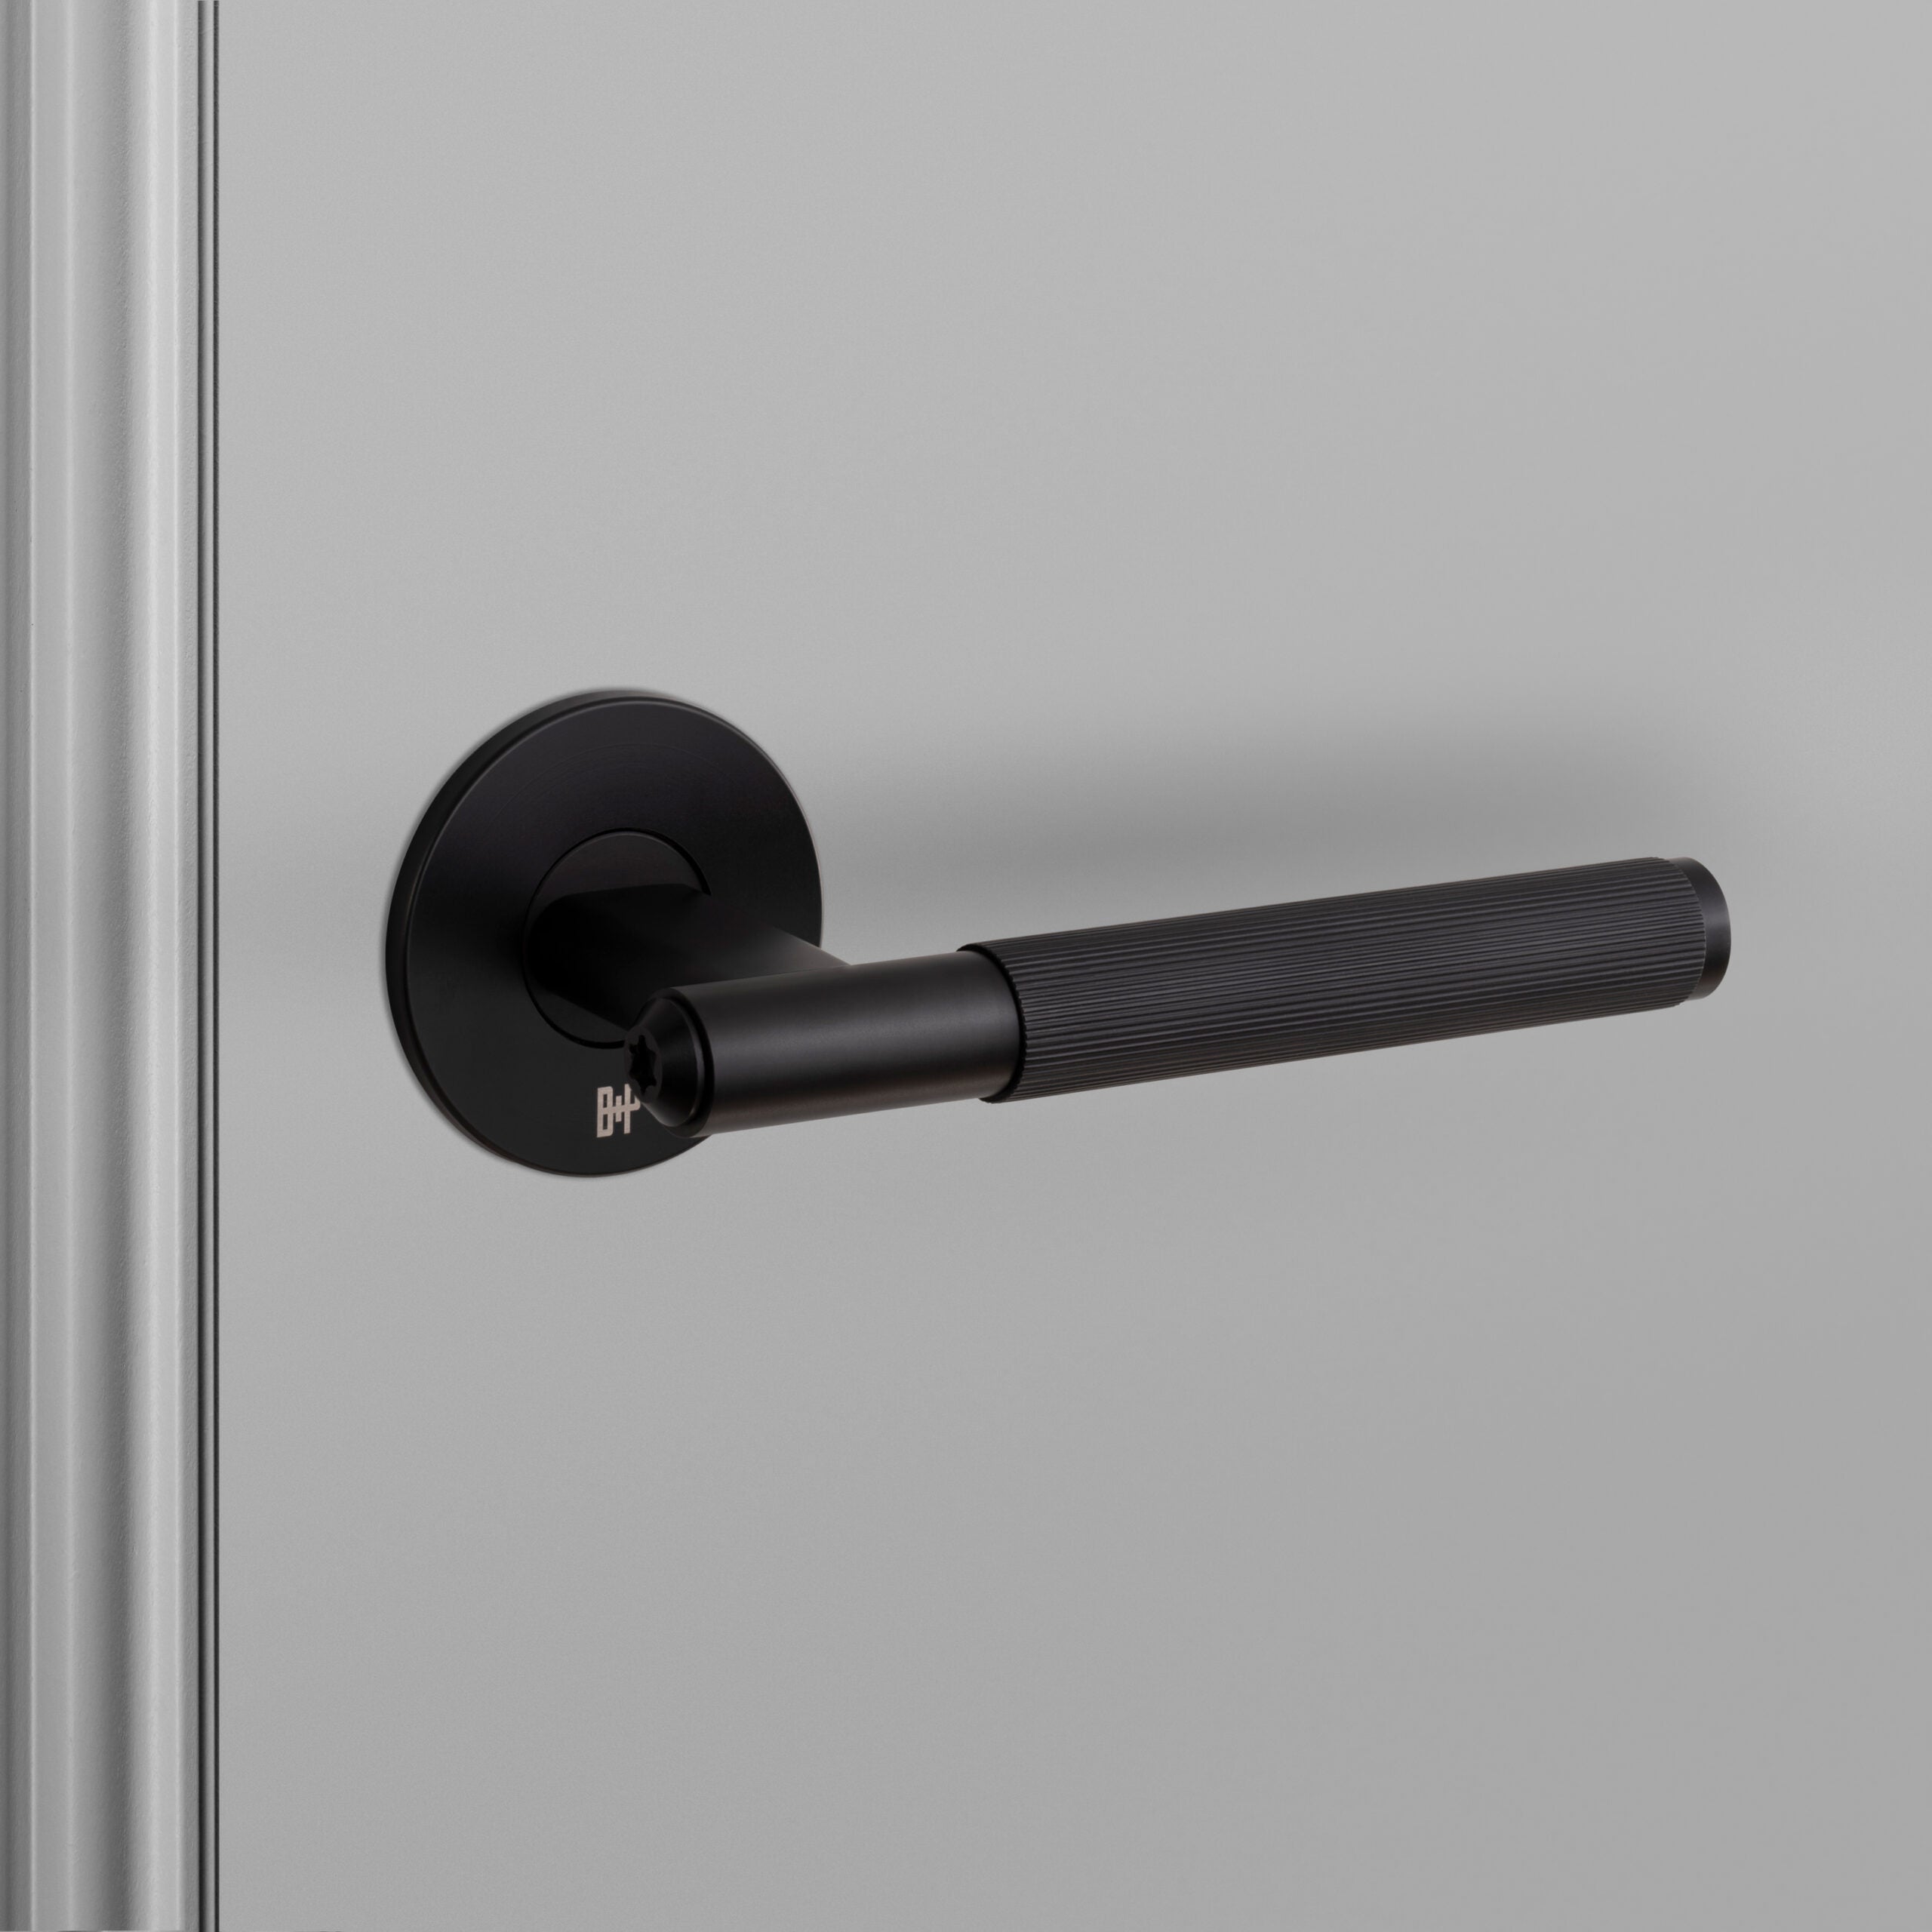 Buster + Punch Conventional Door Handle, Linear Design - FIXED TYPE